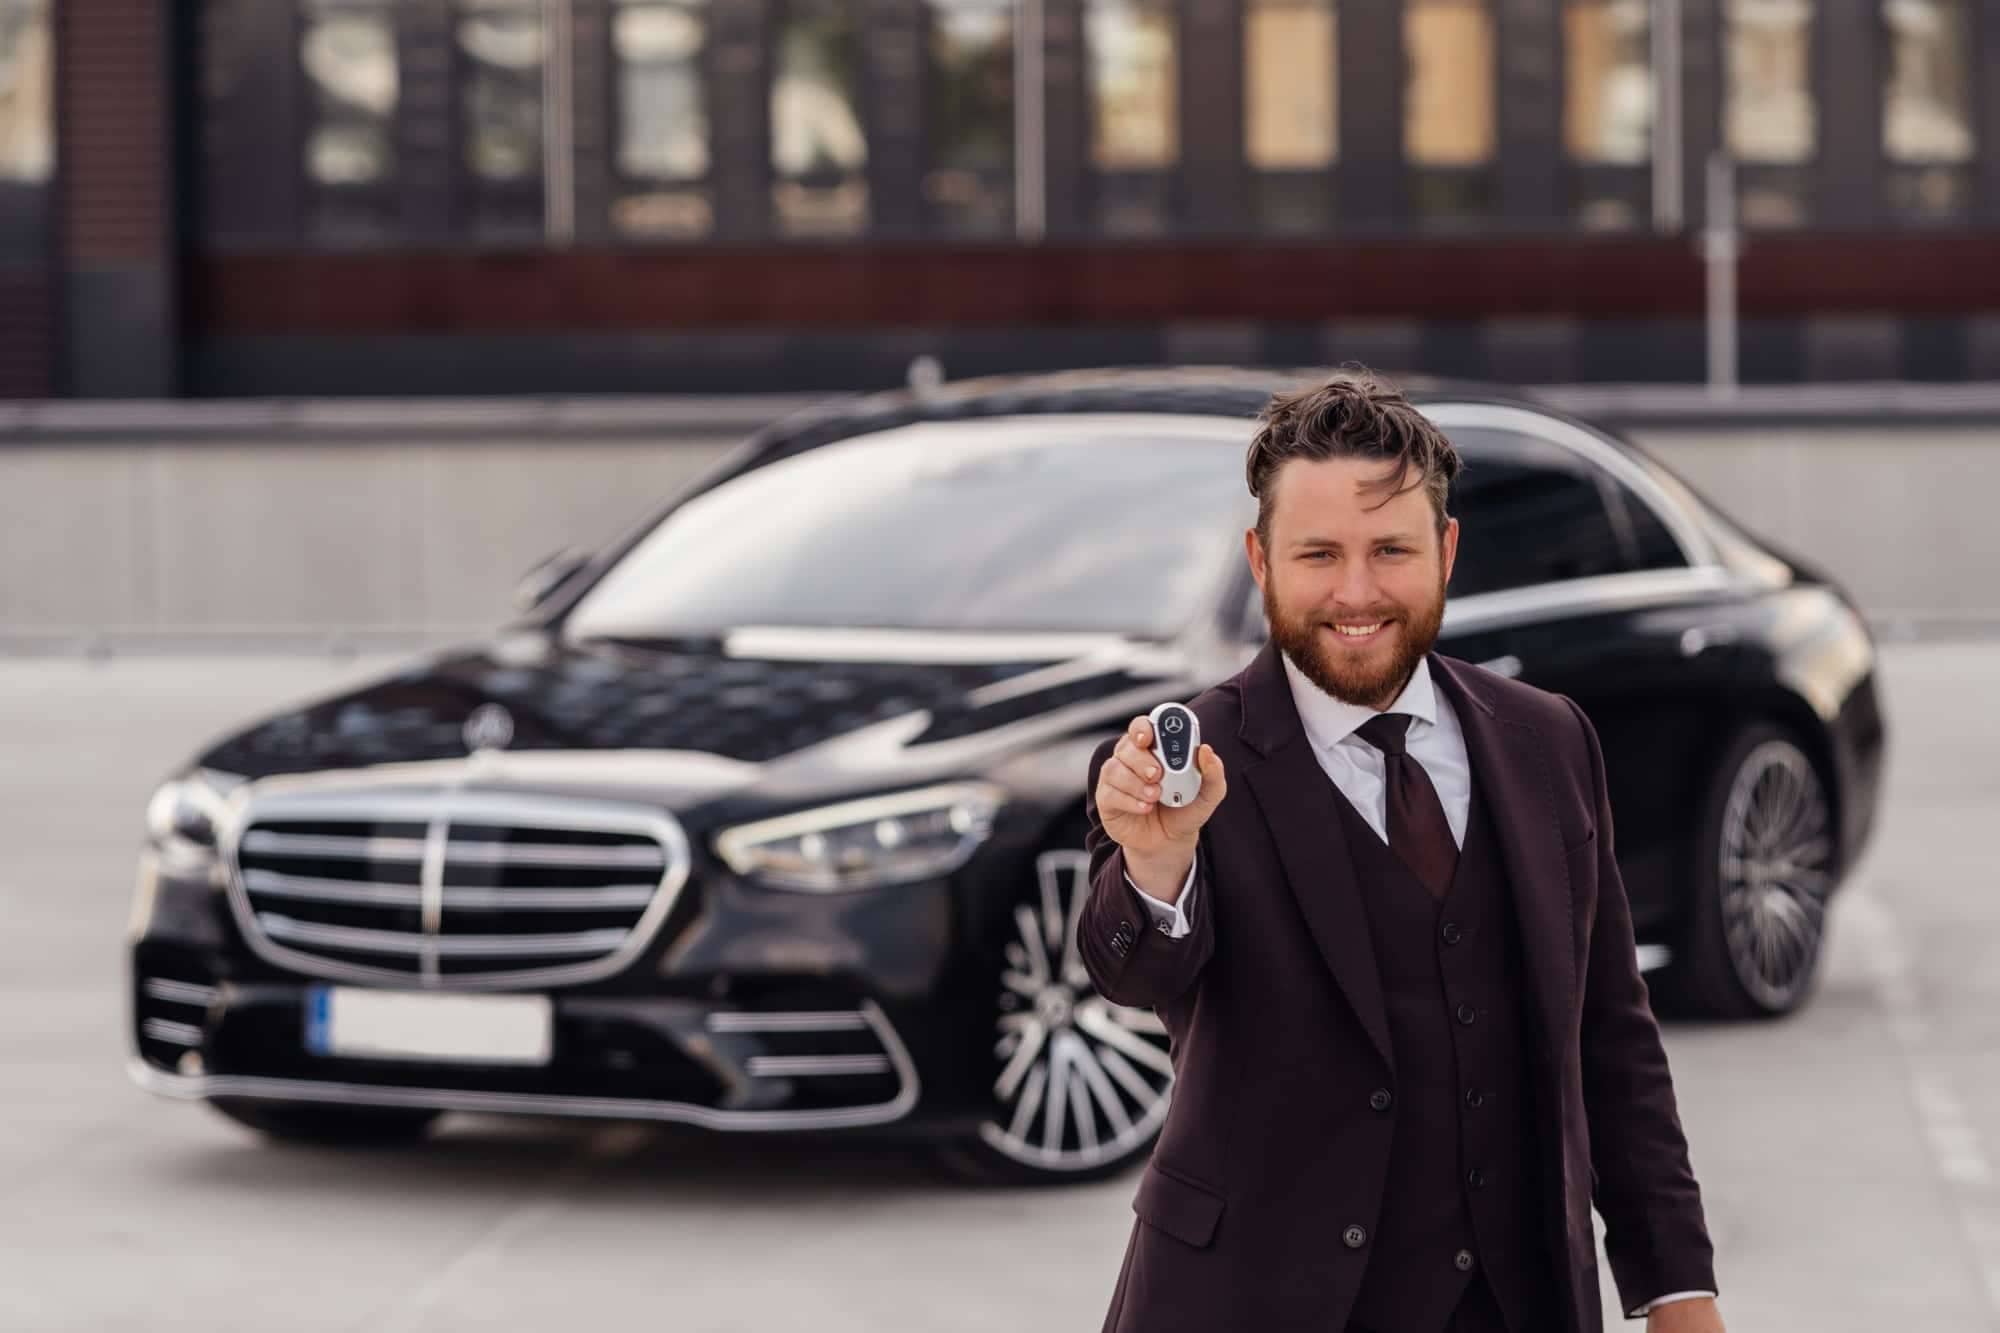 Brussels, Belgium July 22, 2021 Mercedes Benz S500 AMG S class w223 brand new model is standing in the parking lot by a modern office in the background.Smiling limousine transfer driver with key in hand.